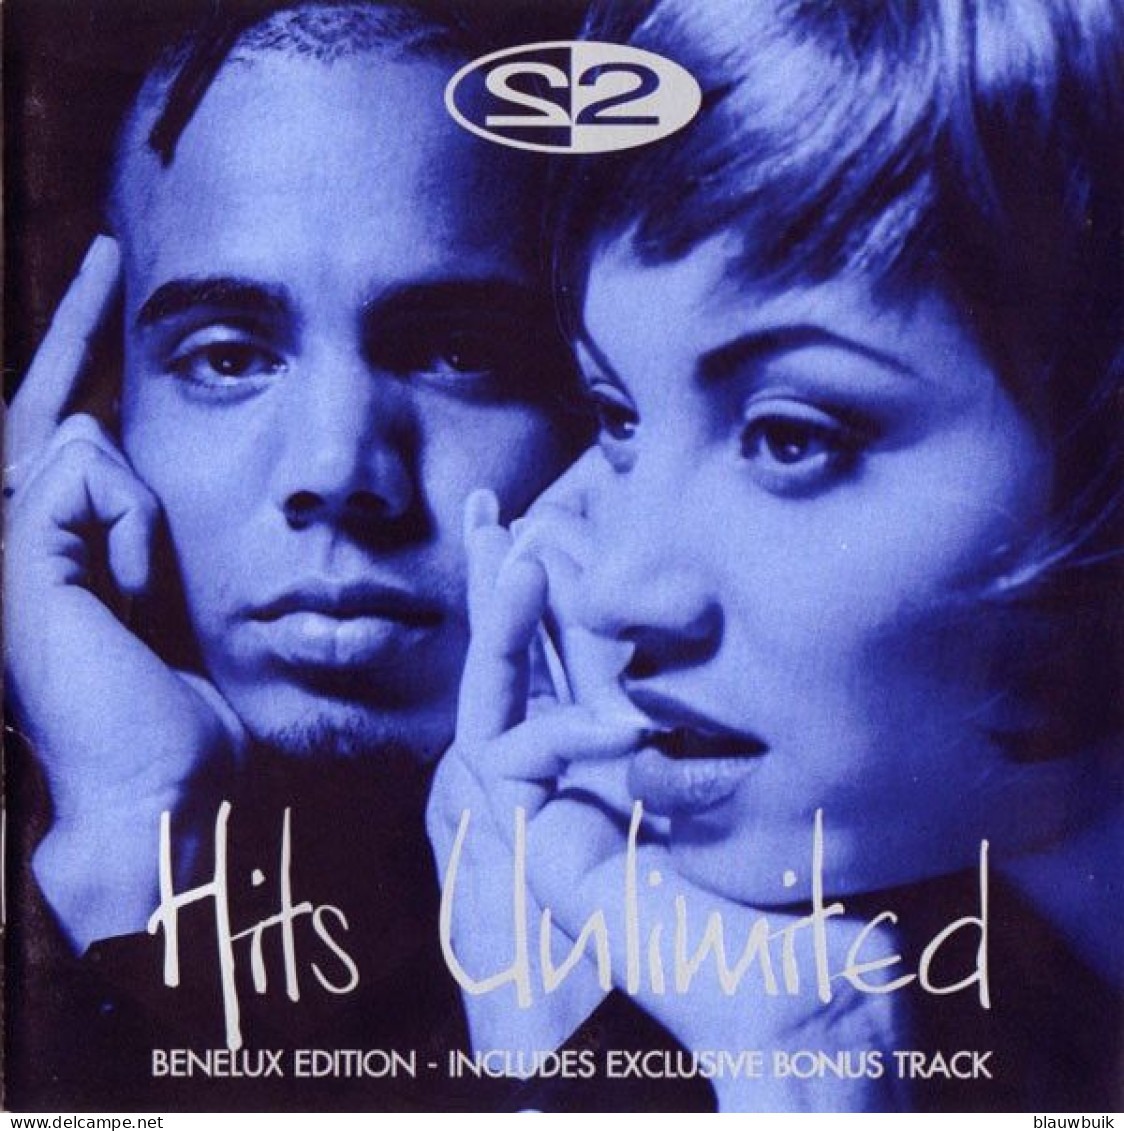 1x CD 2 Unlimited – Hits Unlimited - Other - English Music